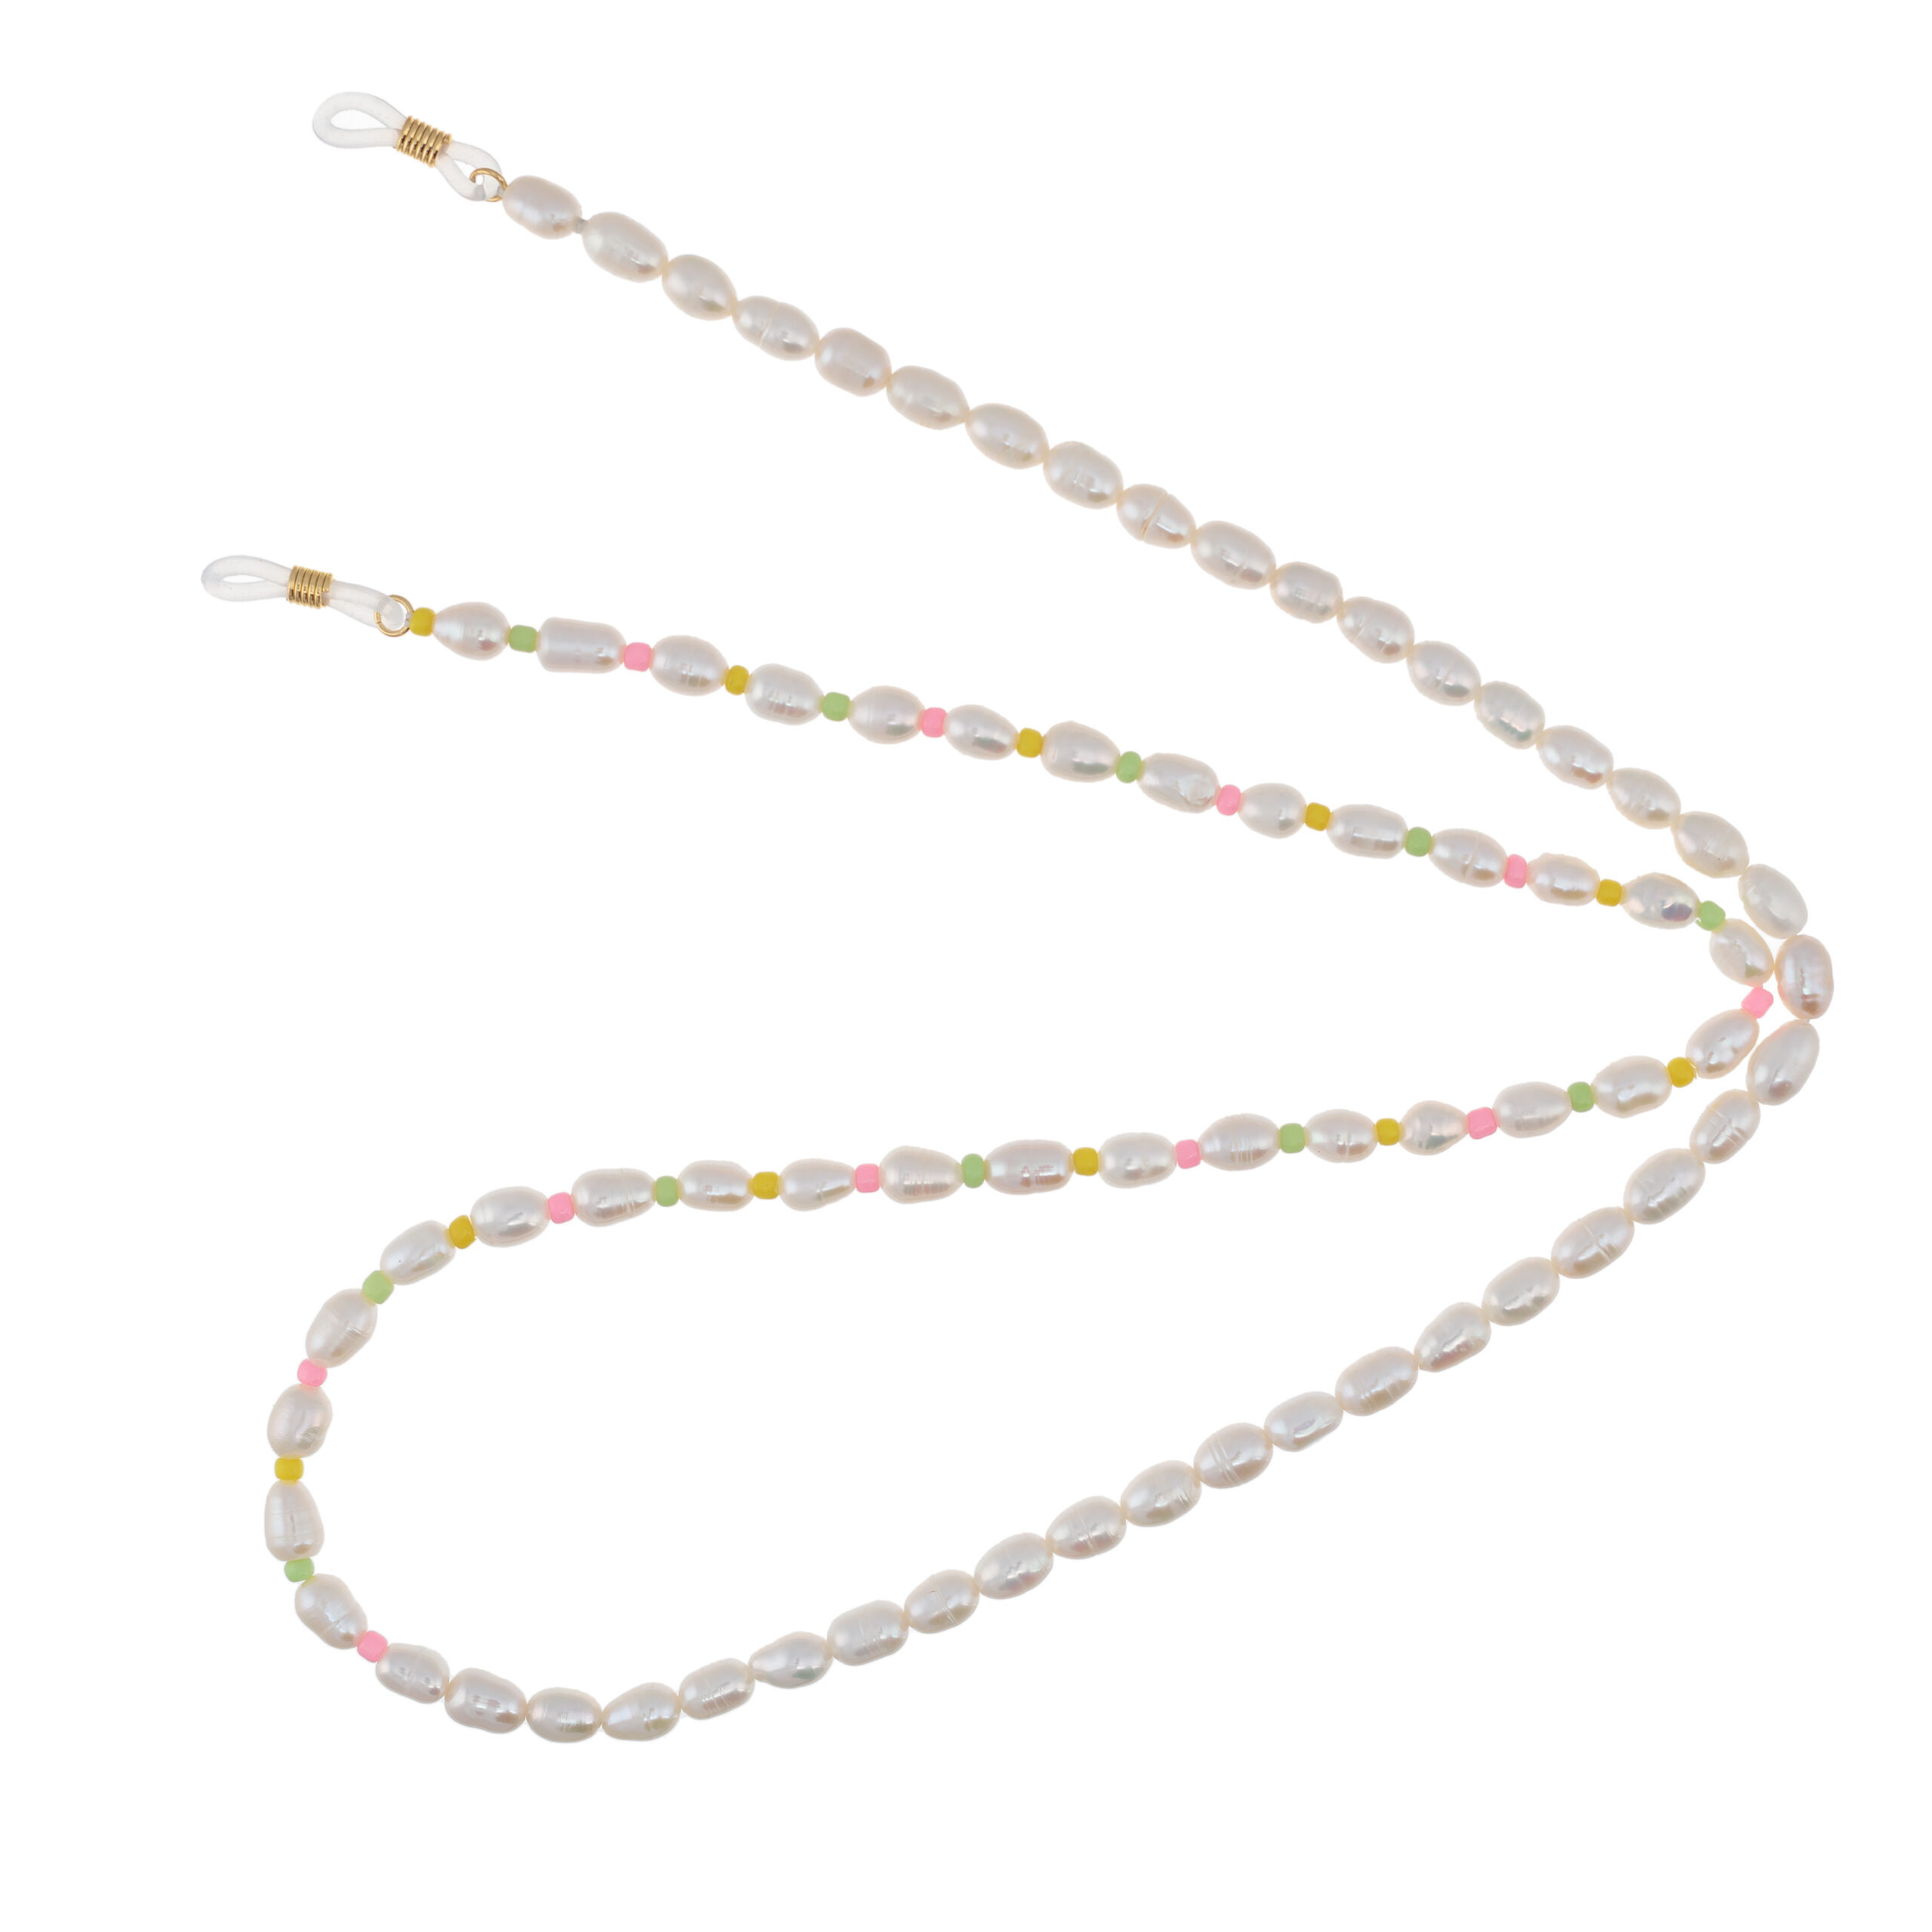 Talis Chains Pastel Pearl Glasses Chain